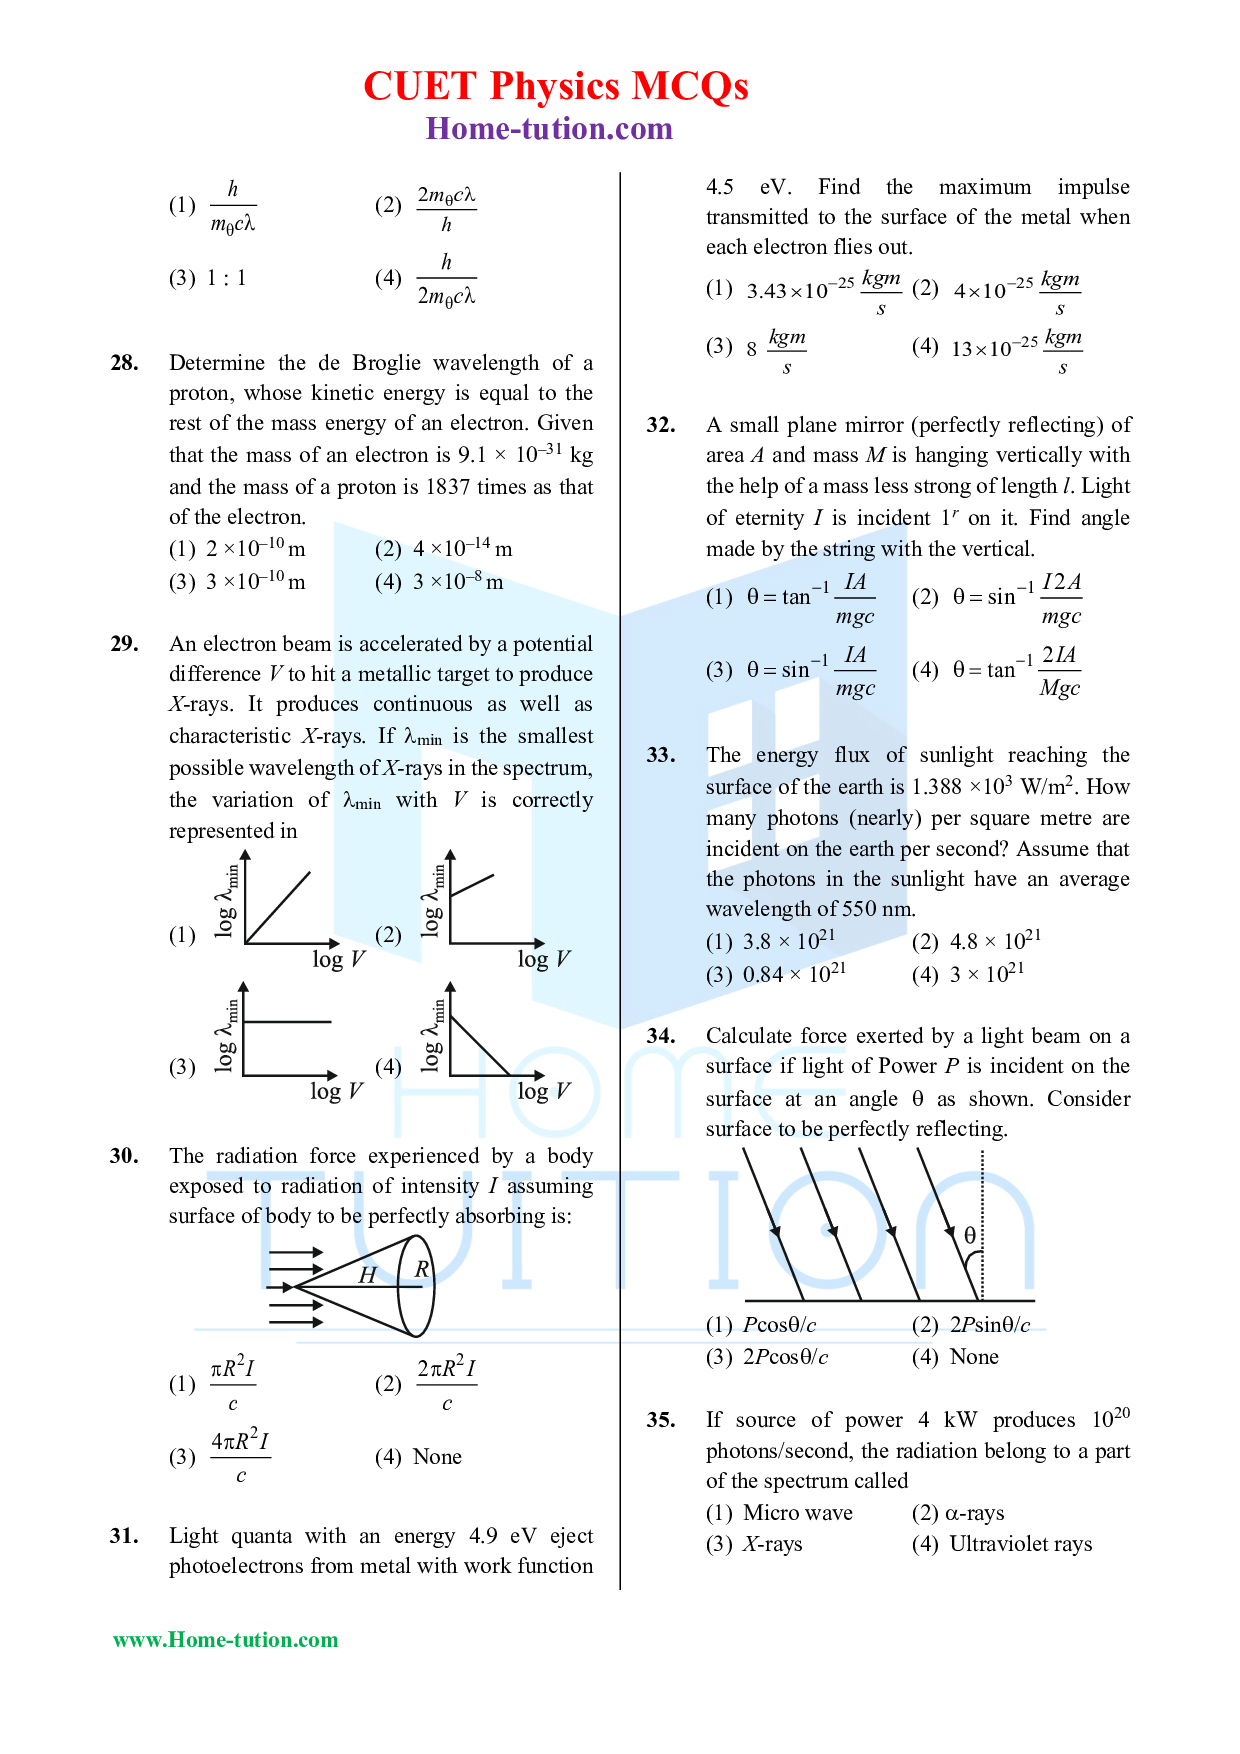 CUET MCQ Questions For Physics Chapter-11 Matter waves and Photoelectric effect